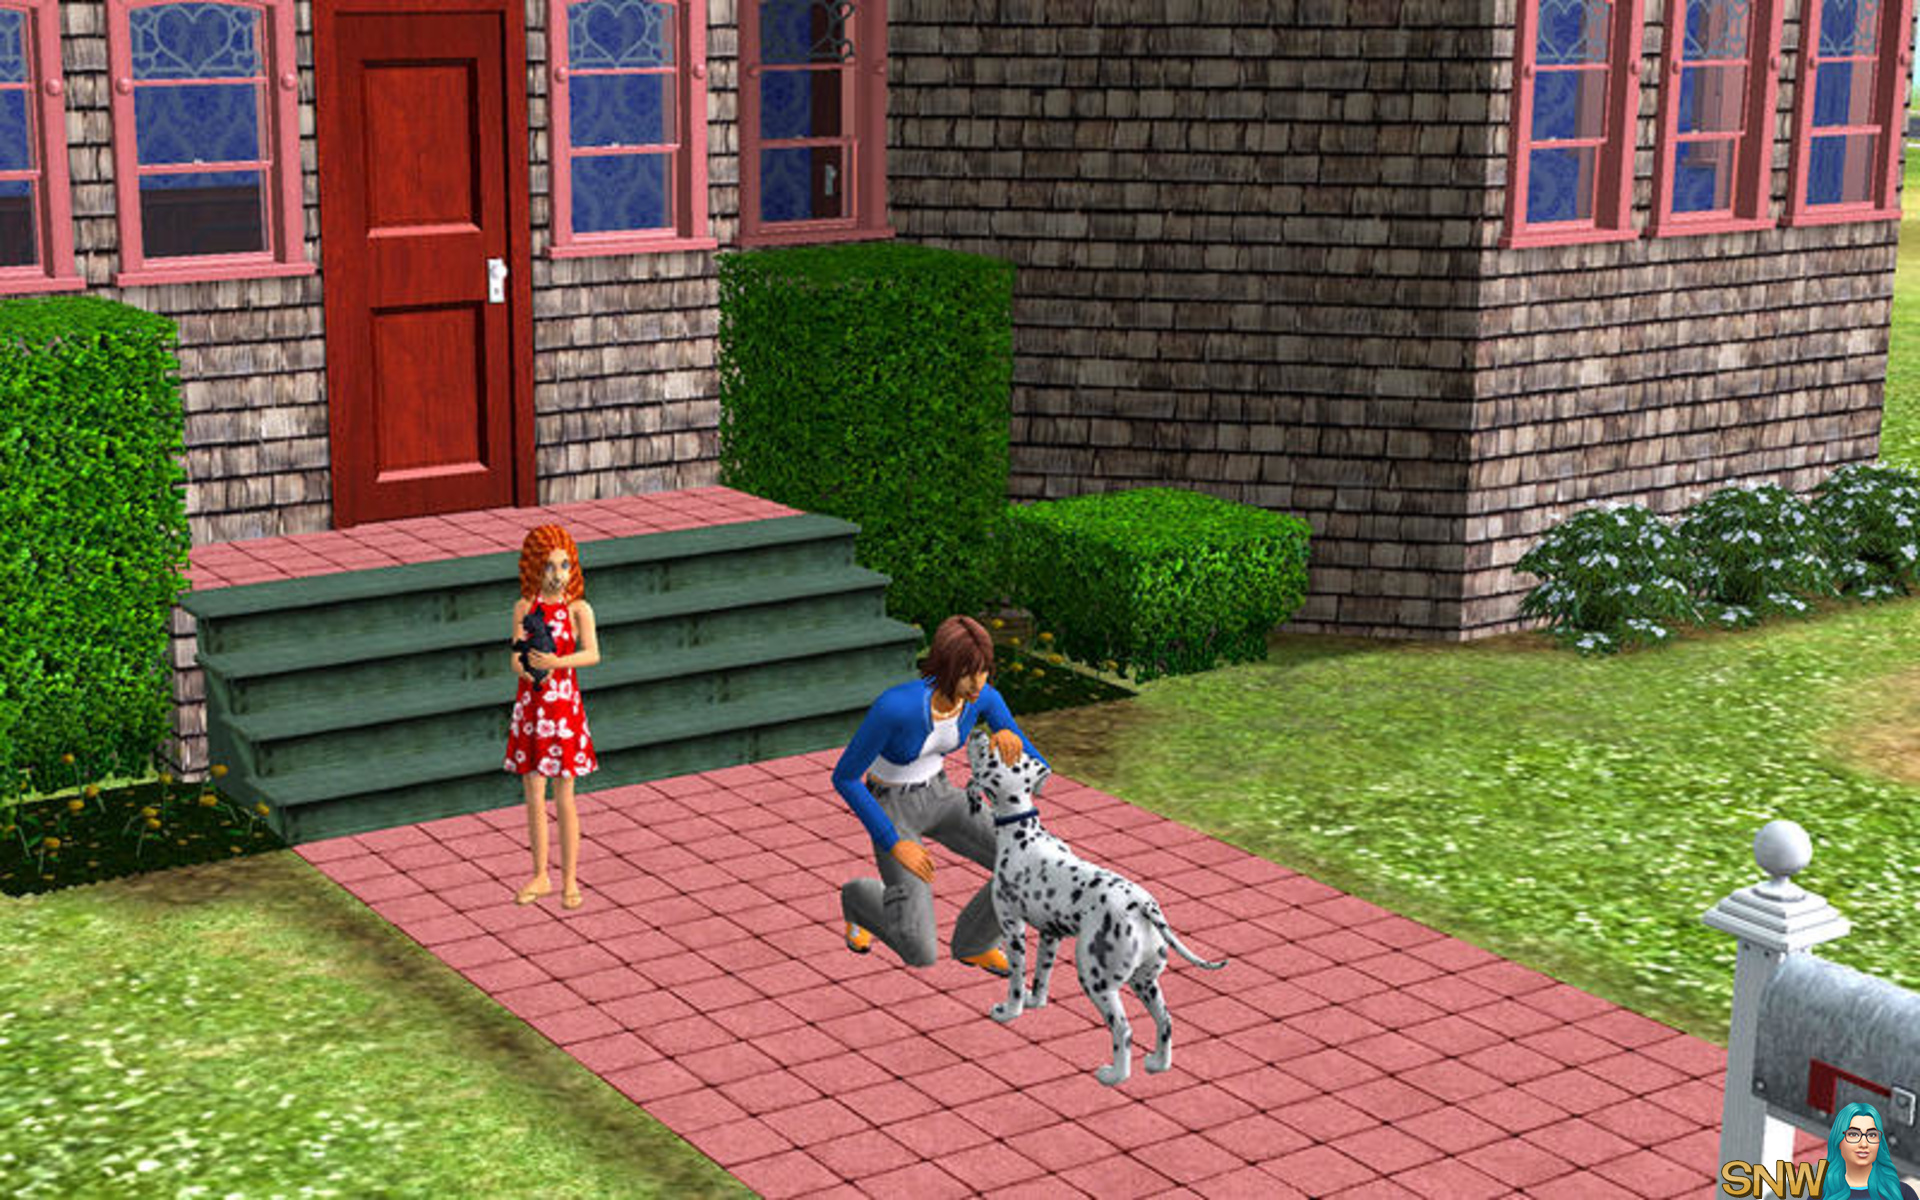 Game sims 2. The SIMS 2. SIMS 2 screenshots. Симс 2 Ultimate collection. Симс 2 ультимейт.